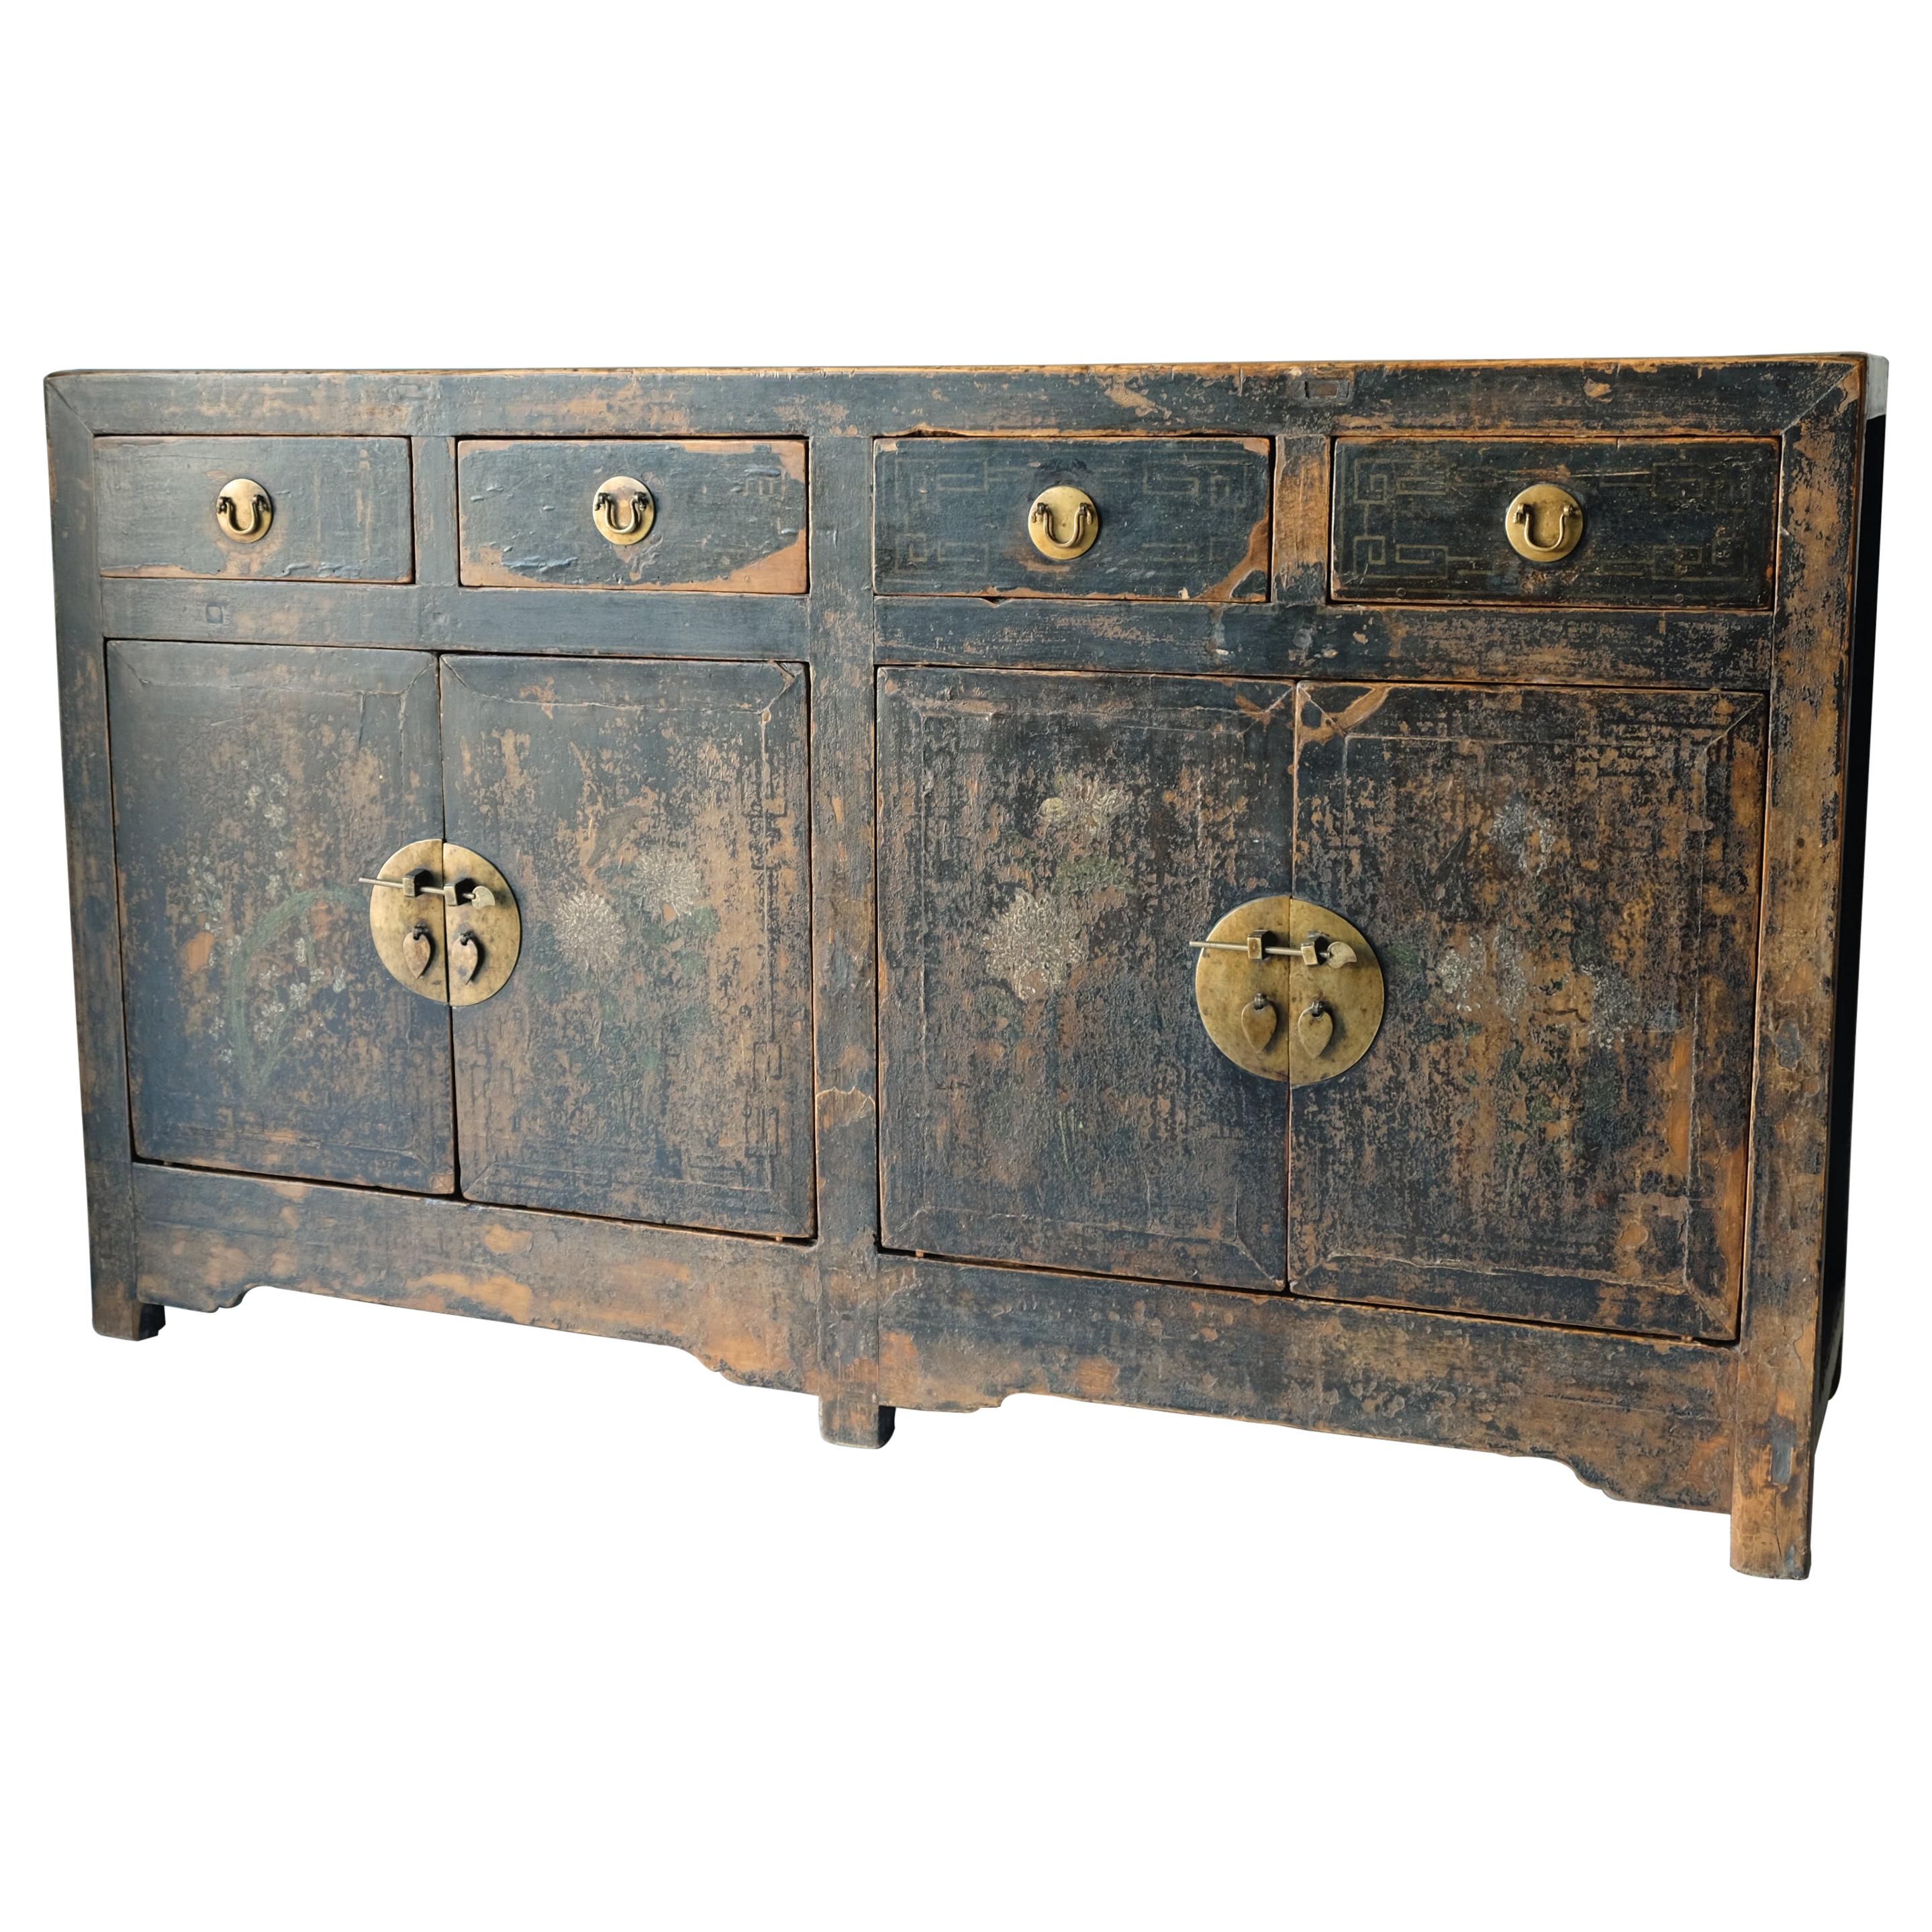 Chinese Sideboard Cabinet, Original Paint, Black Lacquer, 19th Century, Storage